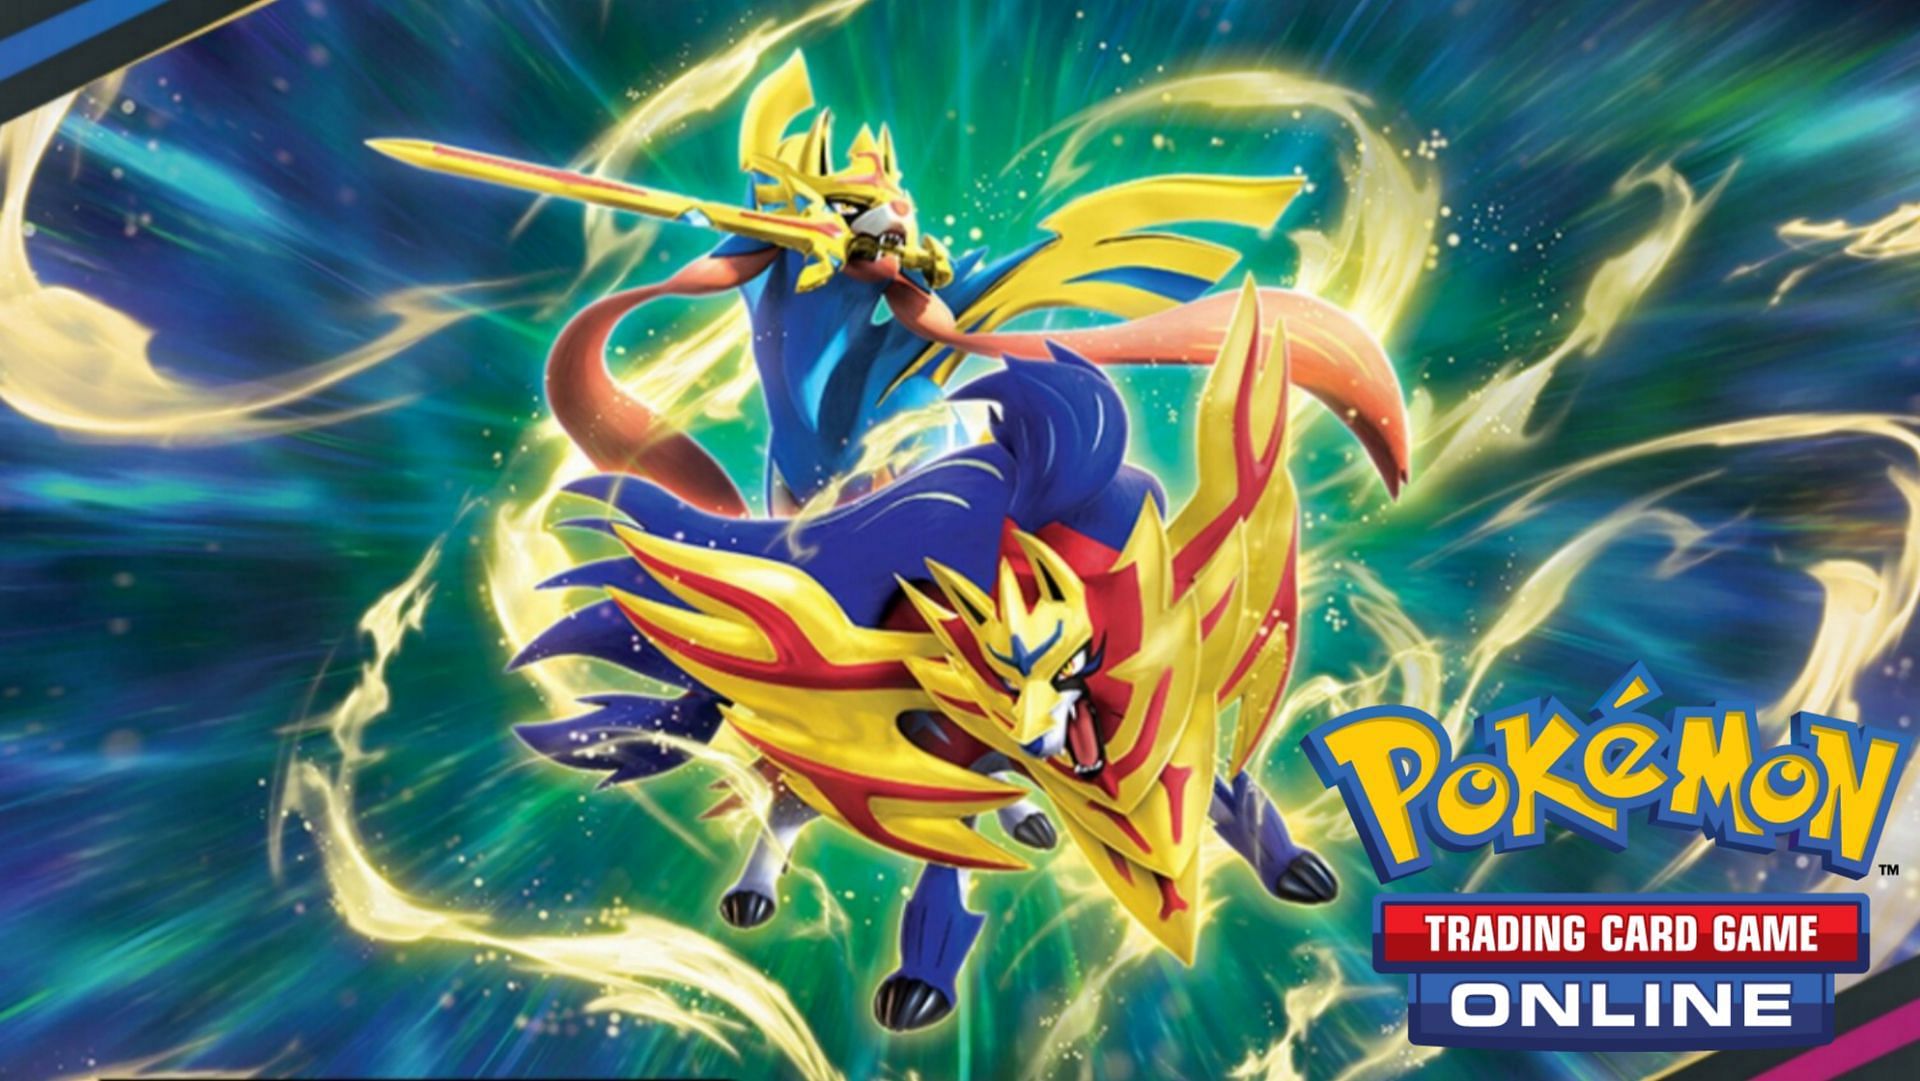 To get ready for Pokemon TCG Live, Pokemon TCG Online announced its last update.